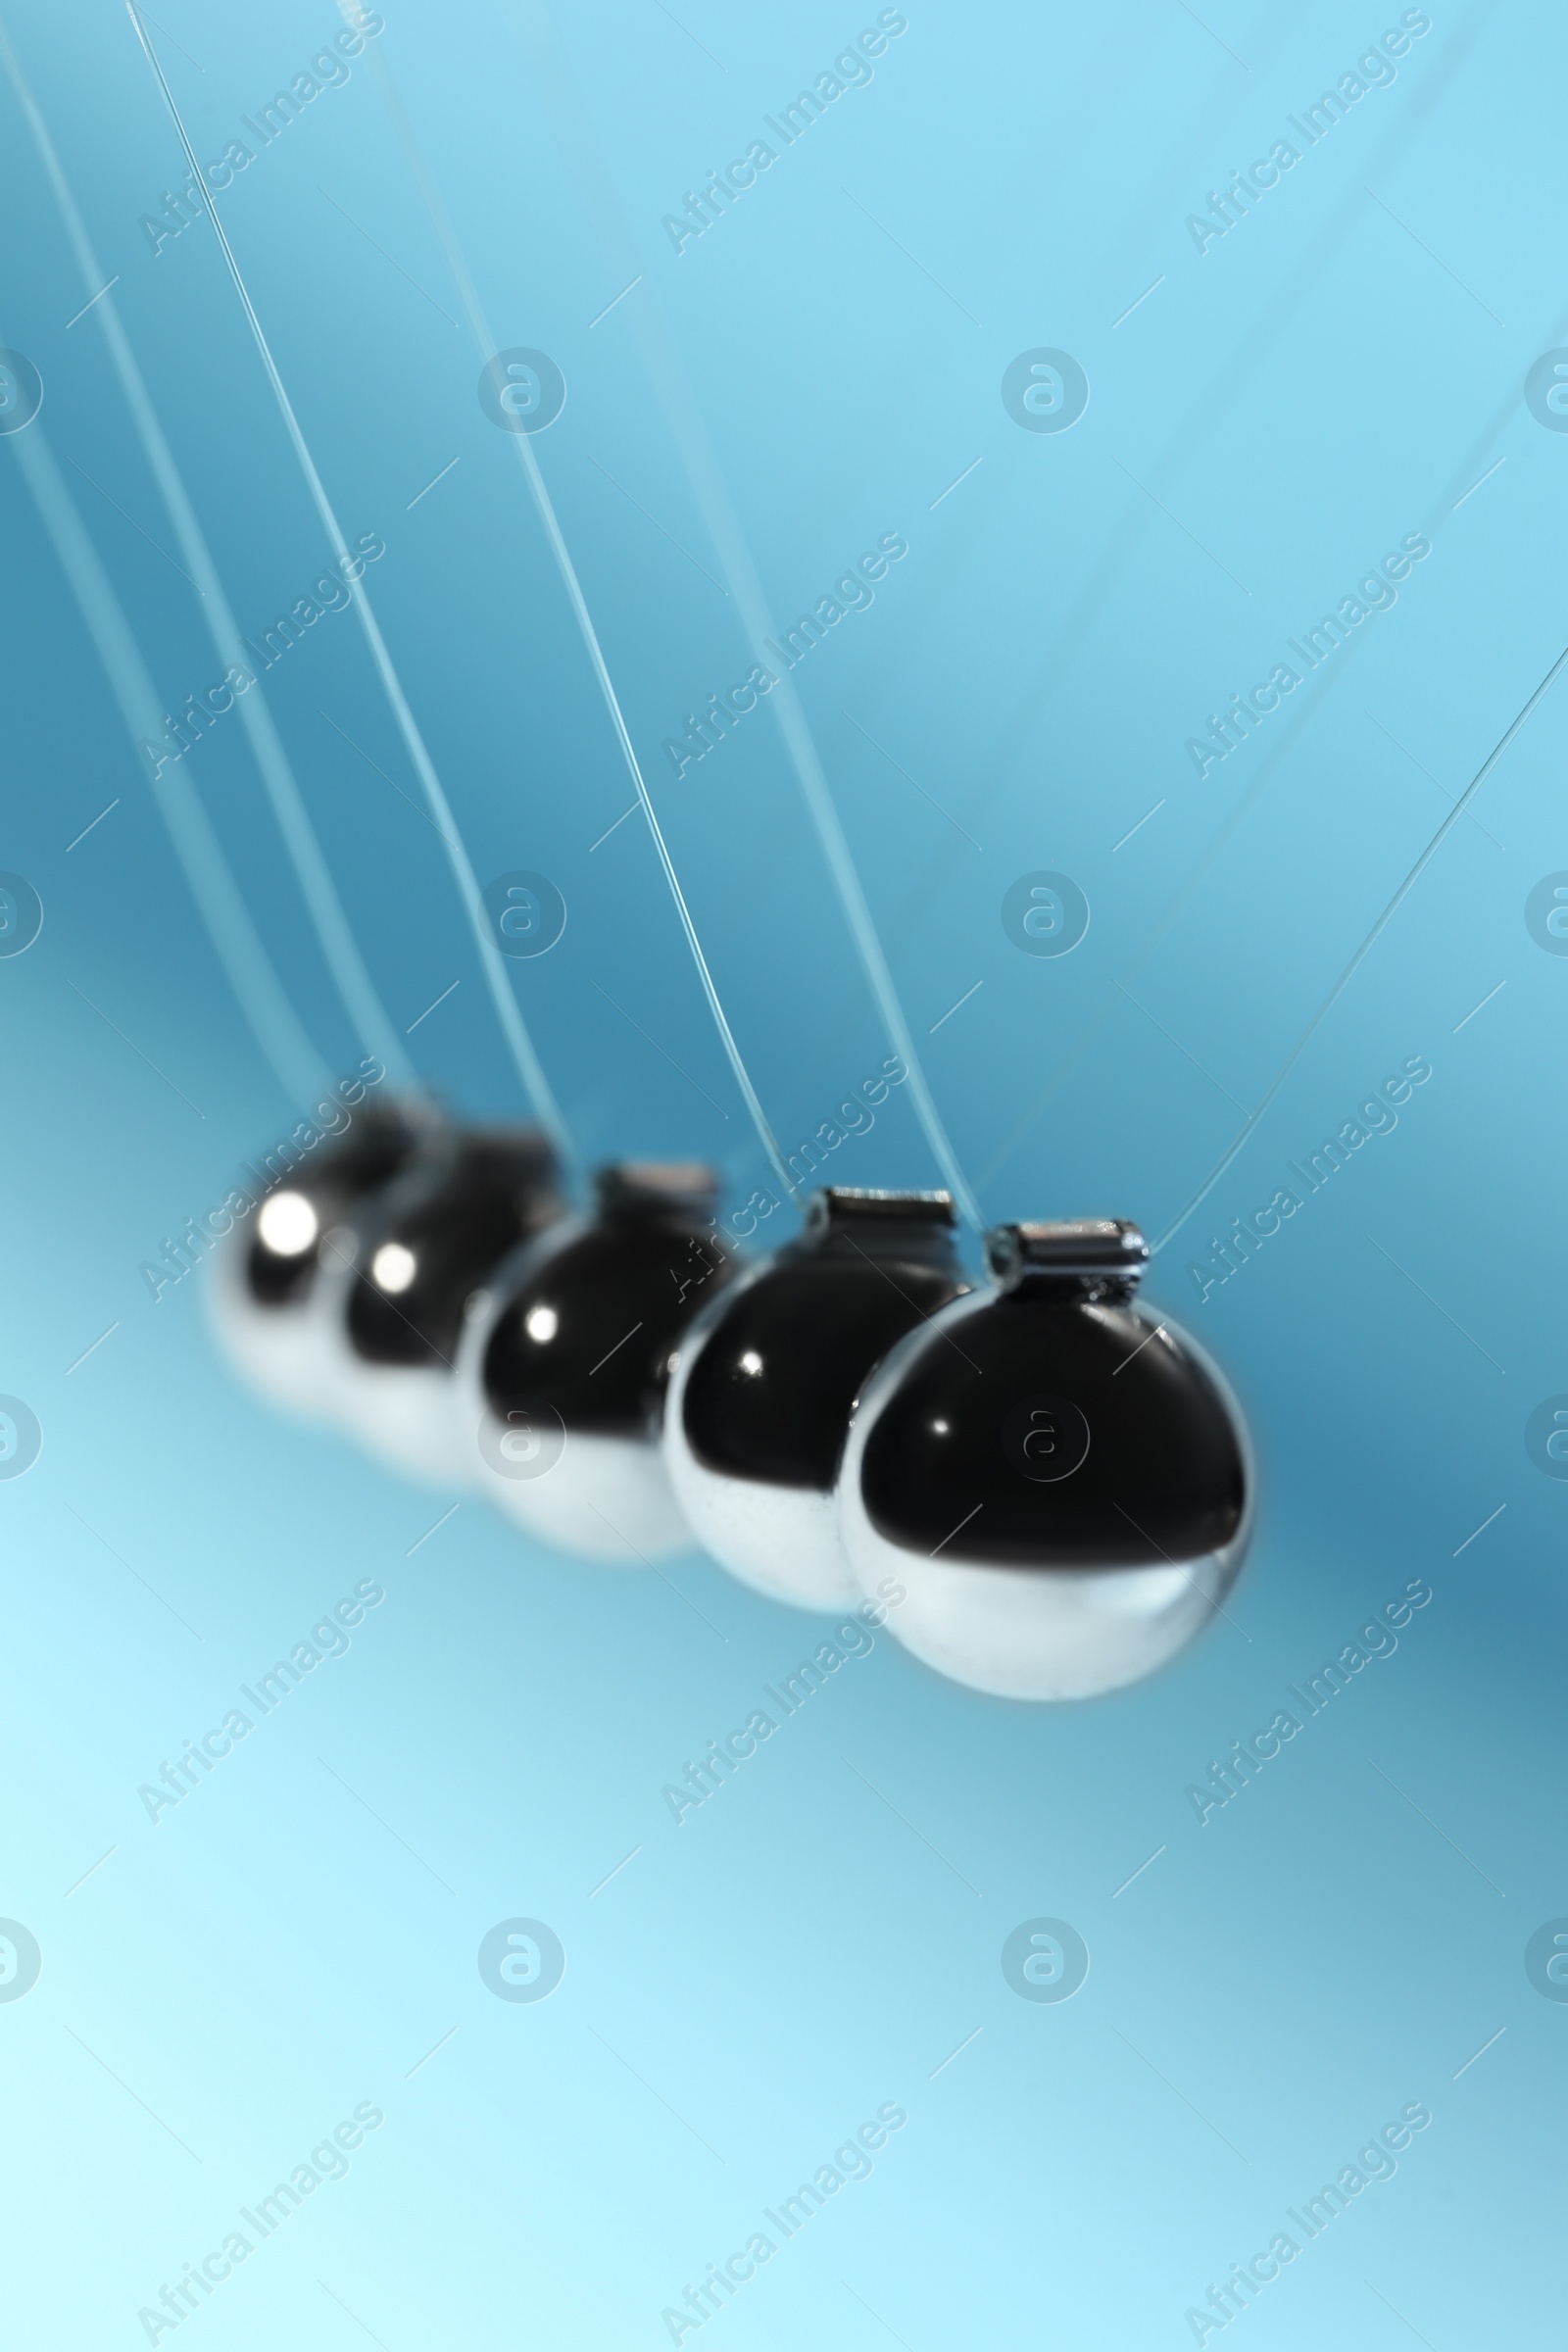 Photo of Newton's cradle on light blue background. Physics law of energy conservation